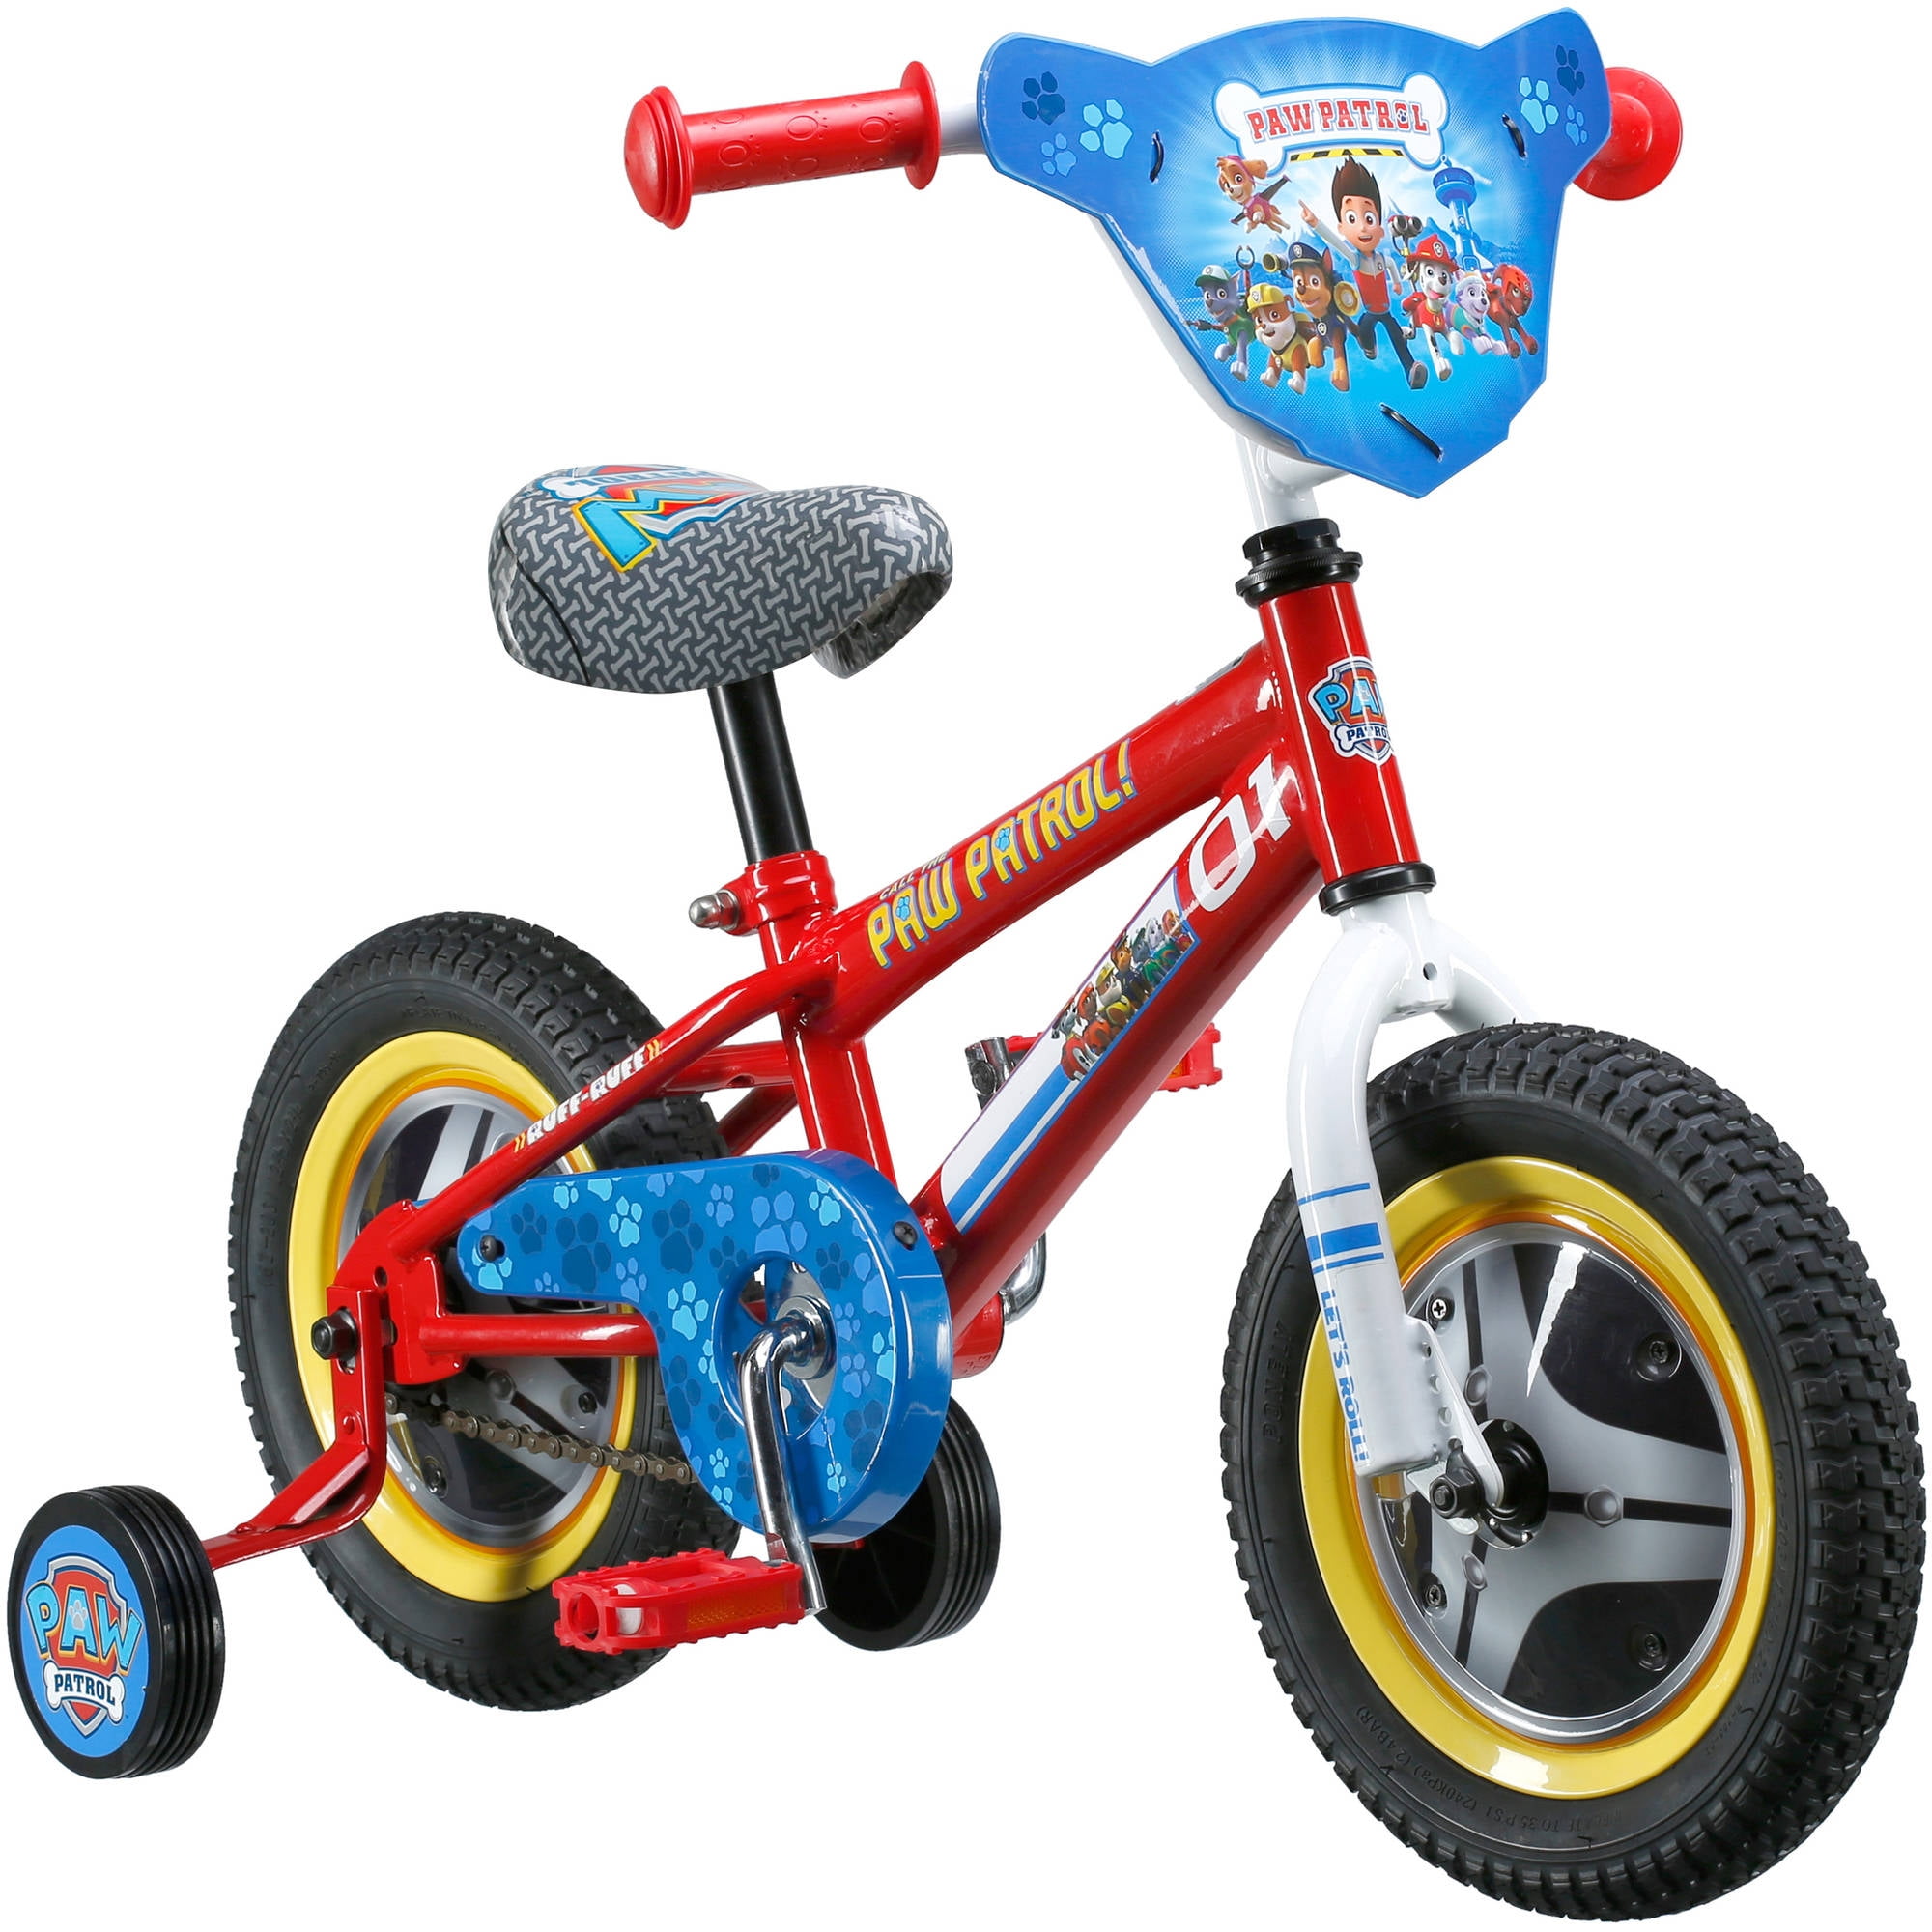 12" Boys' Bike Paw Patrol Marshall Steel Frame Small Toddler Red Bicycle Gift 